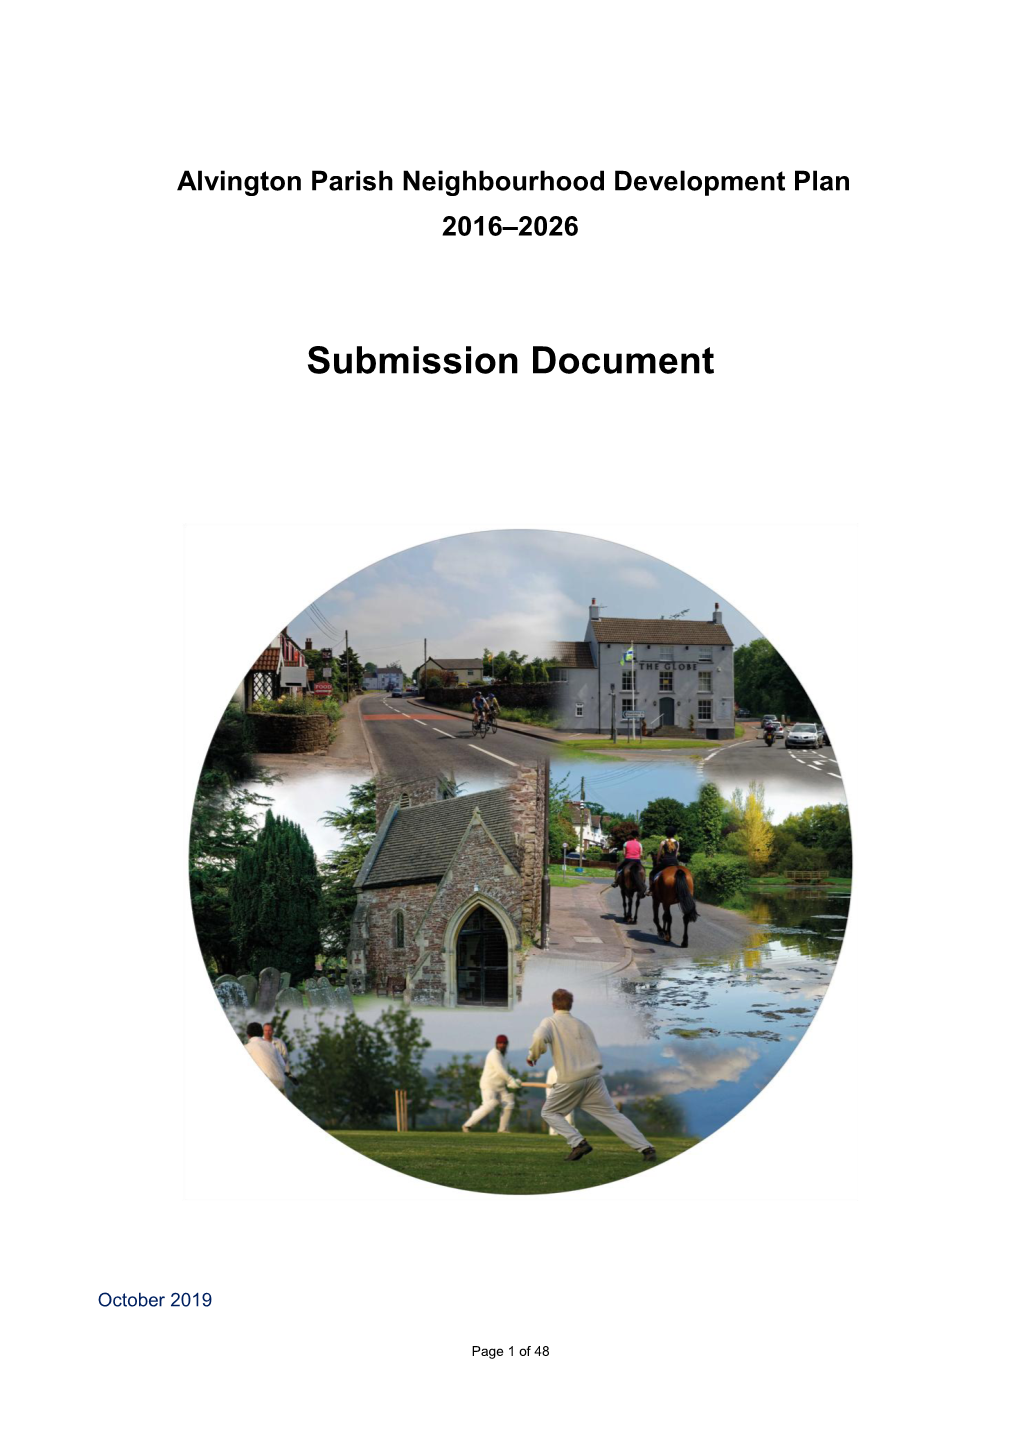 Submission Document